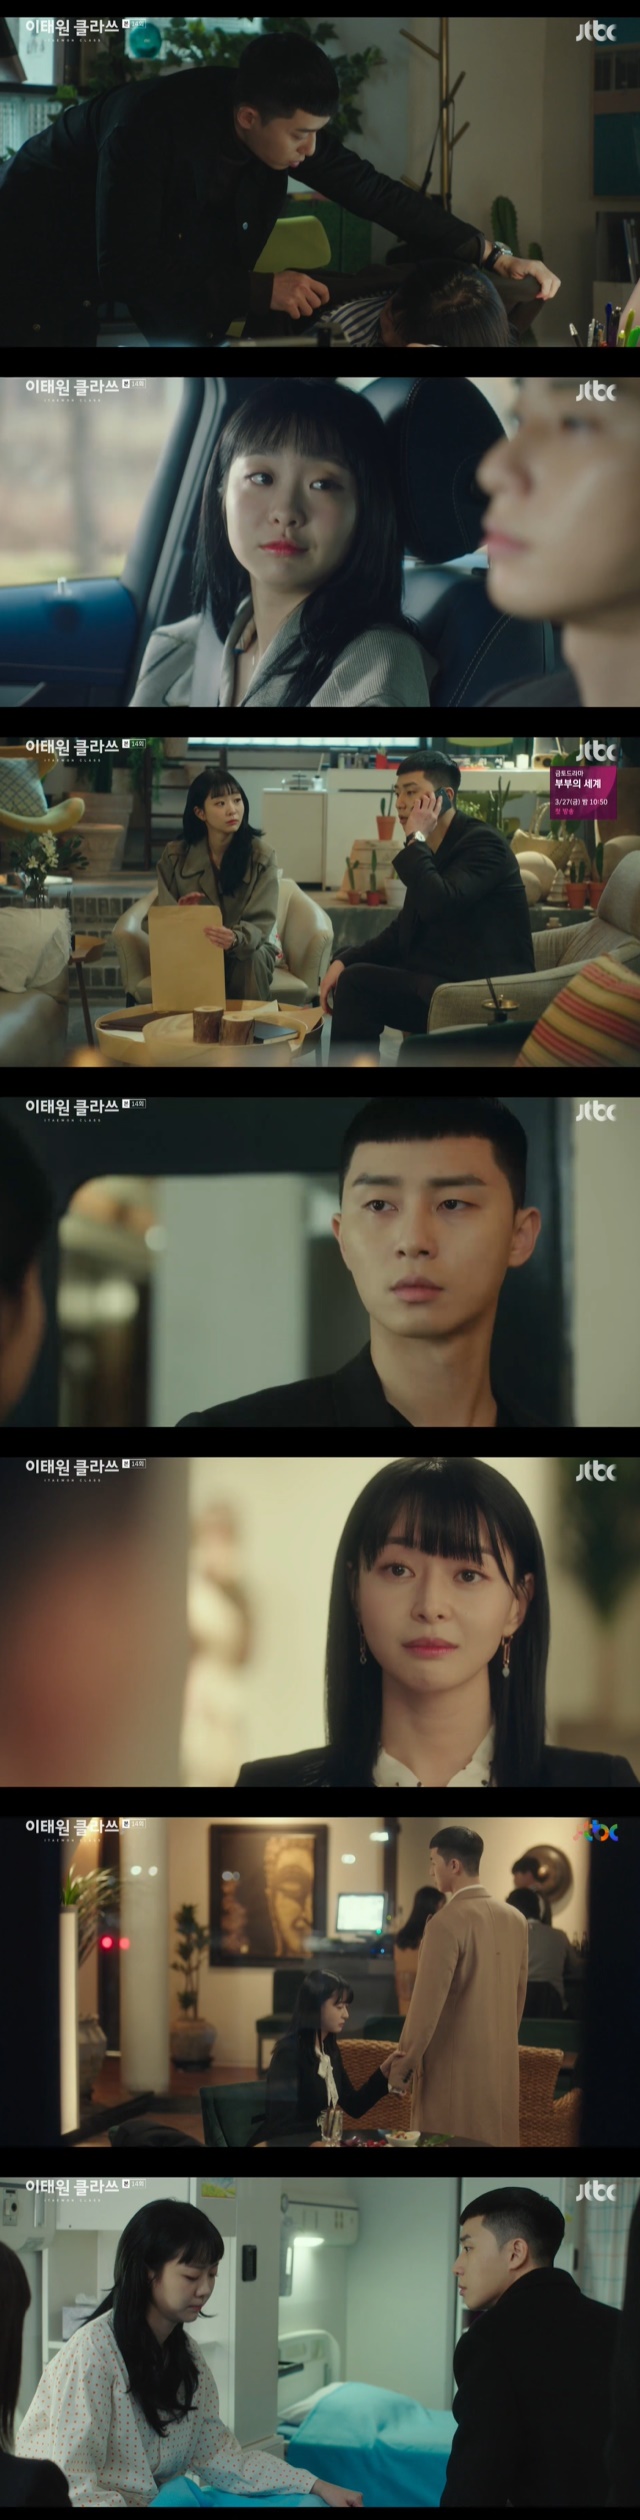 Park Seo-joon was in danger of losing his life as soon as he realized his love for Kim Da-mi.In the 14th episode of JTBCs gilt drama Itaewon Klath (playplayed by Cho Kwang-jin/directed by Kim Sung-yoon), which aired on March 14, Park Sae-ro-yi (Park Seo-joon) was involved in a ruse by Jean Fountainhead (played by Ahn Bo-hyun).Park Sae-ro-yi, who informed Joy Seo (Kim Da-mi) that Jang Dae-hee (Yoo Jae-myung) had been sentenced to a deadline, later planned to dismiss the existing outside board members along with Kang Min-jung (Kim Hye-eun) and Lee Ho-jin (Lee Dae-wit) and establish Joy Seo as a new outside director.Park Sae-ro-yi, who had already seen Joy Seo working without a break from sleep on a Chinese contract, was worried about his health.Joy asked, If youre so sorry, just give me a wish, just give me a date, but Park Sae-ro-yi pushed it away, Do it properly.Park Sae-ro-yi, who was working with Joy, noticed when a call came from Oh Soo-ah (Kwon Na-ra).Joy said, Someone can not love and works all night.Park Sae-ro-yi once again drew a line to such a Joy, but was confused, saying, Why should I feel sorry for you?Joy provoked Park Sae-ro-yi by saying, I feel a little like a woman.Park Sae-ro-yi, whose scheduled schedule was cancelled, met Oh Soo-ah at a cafe.Oh Soo-ah said he had achieved what he wanted but felt emptiness and asked if he still liked himself; however, Park Sae-ro-yi did not answer easily.At this time, Joy Seo, who met Jang Geun-soo (Kim Dong-hee), came into the same cafe and ran out of the cafe after seeing the two people.Oh Soo-ah caught Park Sae-ro-yi, who had a hunch that Park Sae-ro-yis mind had changed and was trying to follow Joy. Oh Soo-ah said, It is 15 years.You have to make me a white man, you have to like me. But Park Sae-ro-yi finally left the cafe without saying that he liked Oh Soo-ah.Joy, who was overworked on the day of the shareholders meeting, fell in the company lobby.Park Sae-ro-yi, who moved Joy to the hospital and attended the shareholders meeting alone, was all worried about Joy even though the appointment of outside directors was rejected.Park Sae-ro-yi left the back of the shareholders meeting to Kang Min-jung and Lee Ho-jin and went to the hospital where Joy was hospitalized.Park Sae-ro-yi told Joy that he was rejected as an outside director and said he would do his job again, saying, If you move now, you are fired.Choi Seung-kwon (Ryu Kyung-soo) felt the change of Park Sae-ro-yi. Choi Seung-kwon, who asked if he was confused, said, Im bullshit.Seo-yool Lee and I are different in age, he recalled from Joys confession in the past. What about age?I would like to give you a first love hurt for 10 years. After hearing Choi Seung-kwons words, thoughtful Park Sae-ro-yi found a necklace that Joy said he wanted to have on his way.Park Sae-ro-yi, who bought a necklace and visited the hospital, felt guilty when he heard that Joy Seo told Ma Hyun-yi (Lee Joo-young) that if you can express your affection to the representative, you must be the person who must be around you.Park Sae-ro-yi realized the vacancy in Joy.I also realized that Joy Seo is all the most grateful people, the most sorry people, the best luck of my life, and the loved ones in the event phrase that Choi Seung-kwon was talking about.Park Sae-ro-yi, who learned of his love for Joy, ran to the hospital immediately, and just in time Jang Geun-soo ran to the hospital after seeing the article.Park Sae-ro-yi, who always likes Joy, said to Jang Geun-soo, I understand. Seo-yool Lee is a woman who can risk life.Im going to do it, betrayal, trash, and swearing, and if you hit me, Ill be right.I like Seo-yool Lee, I wont say Im sorry.The Fountainhead (by Ahn Bo-hyun) used Kim Hee-hoon (by Won Hyun-jun) to kidnap Joy.Park Sae-ro-yi moved to the place where he was texted to save Joy, and Jang Geun-soo, who had a gut feeling that he had a problem with Joys personal life, followed behind Park Sae-ro-yi.Lee Ha-na